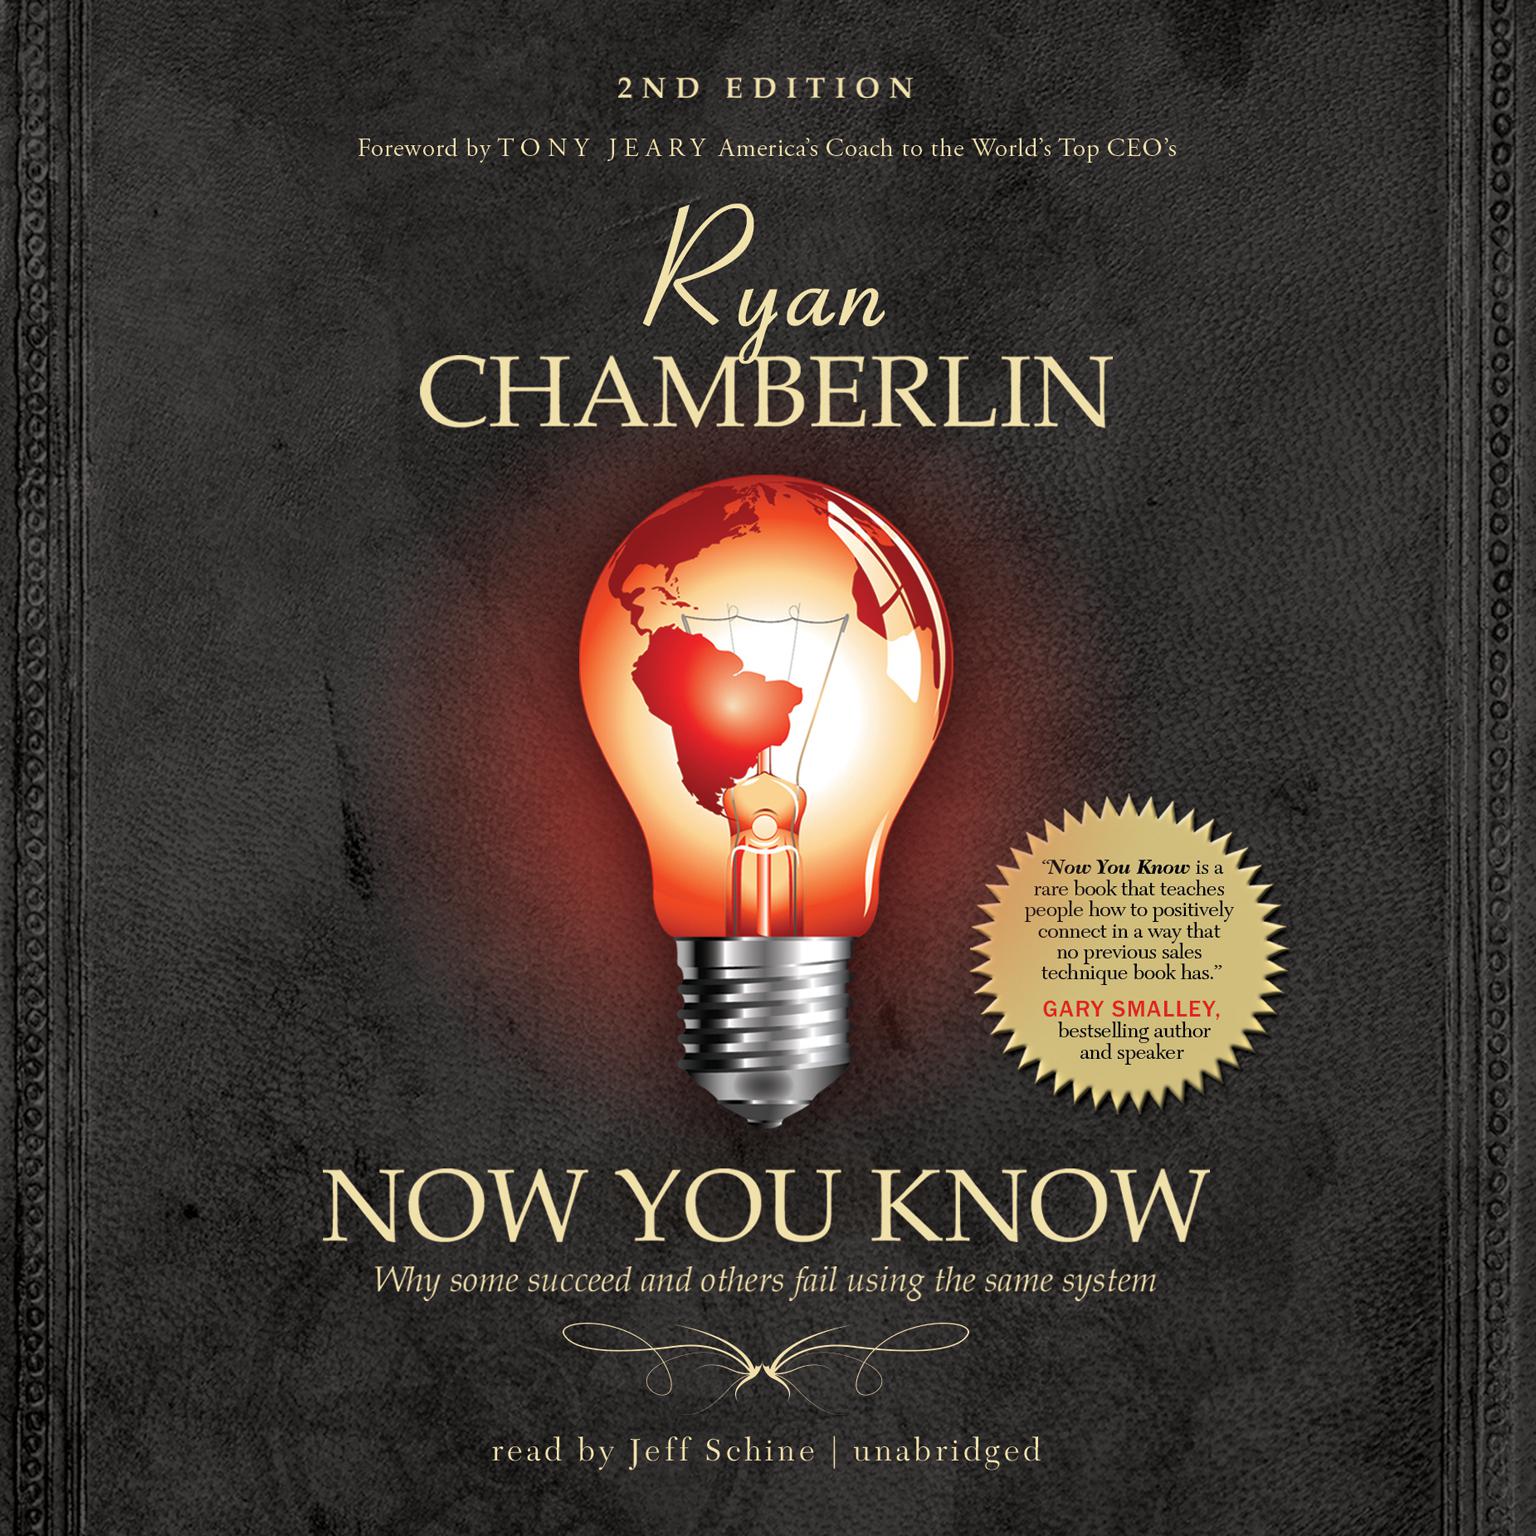 Now You Know: Why Some Succeed and Others Fail Using the Same System Audiobook, by Ryan Chamberlin